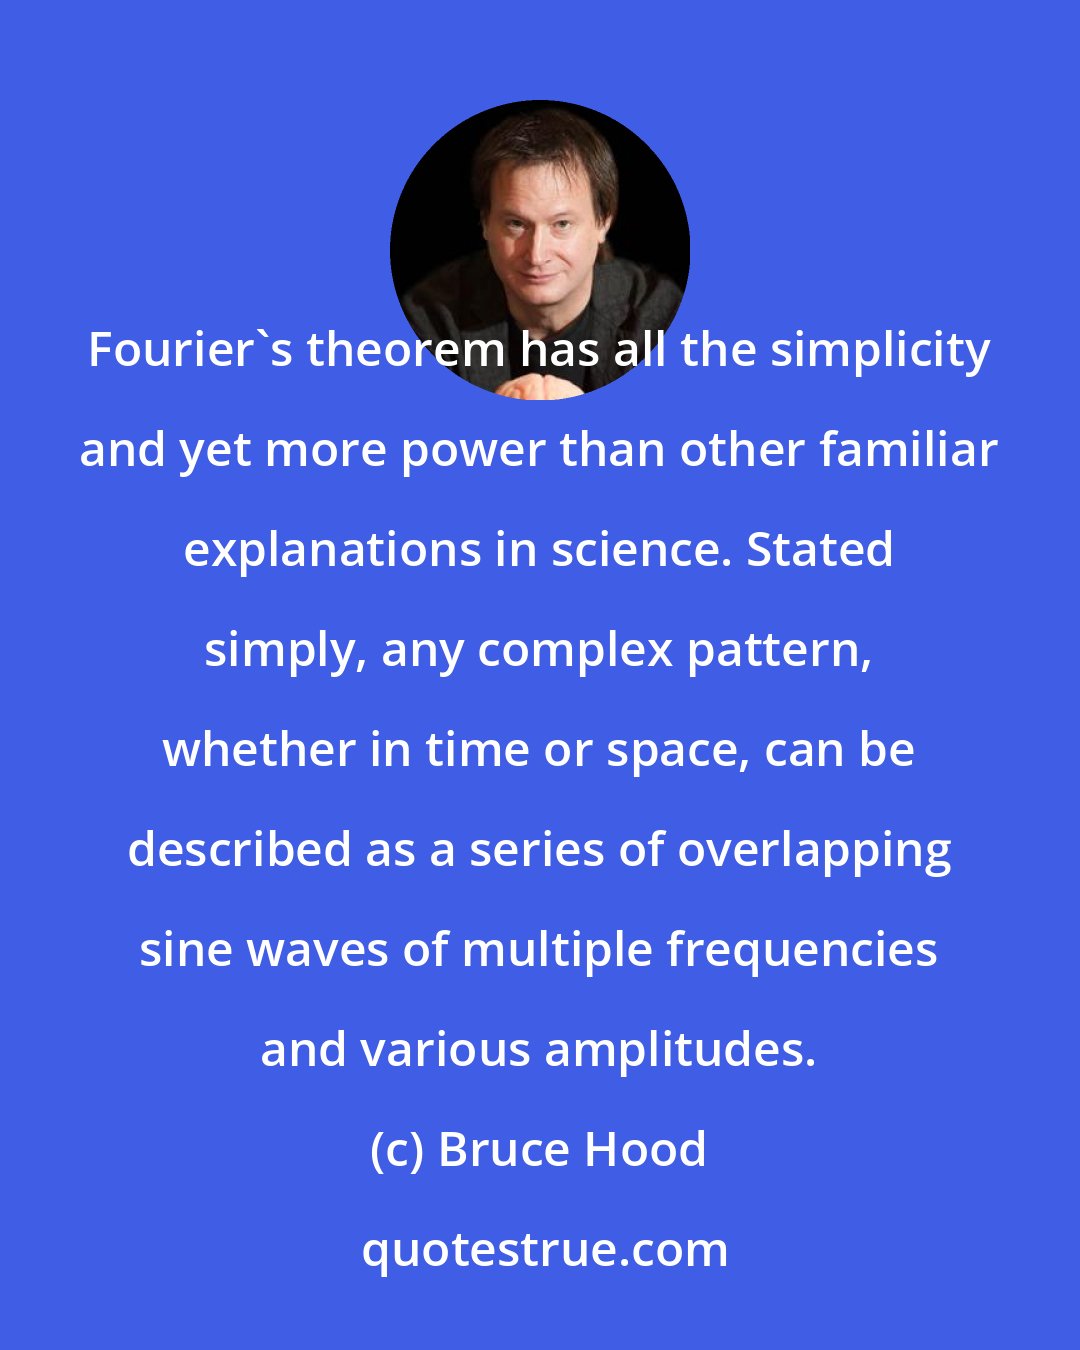 Bruce Hood: Fourier's theorem has all the simplicity and yet more power than other familiar explanations in science. Stated simply, any complex pattern, whether in time or space, can be described as a series of overlapping sine waves of multiple frequencies and various amplitudes.